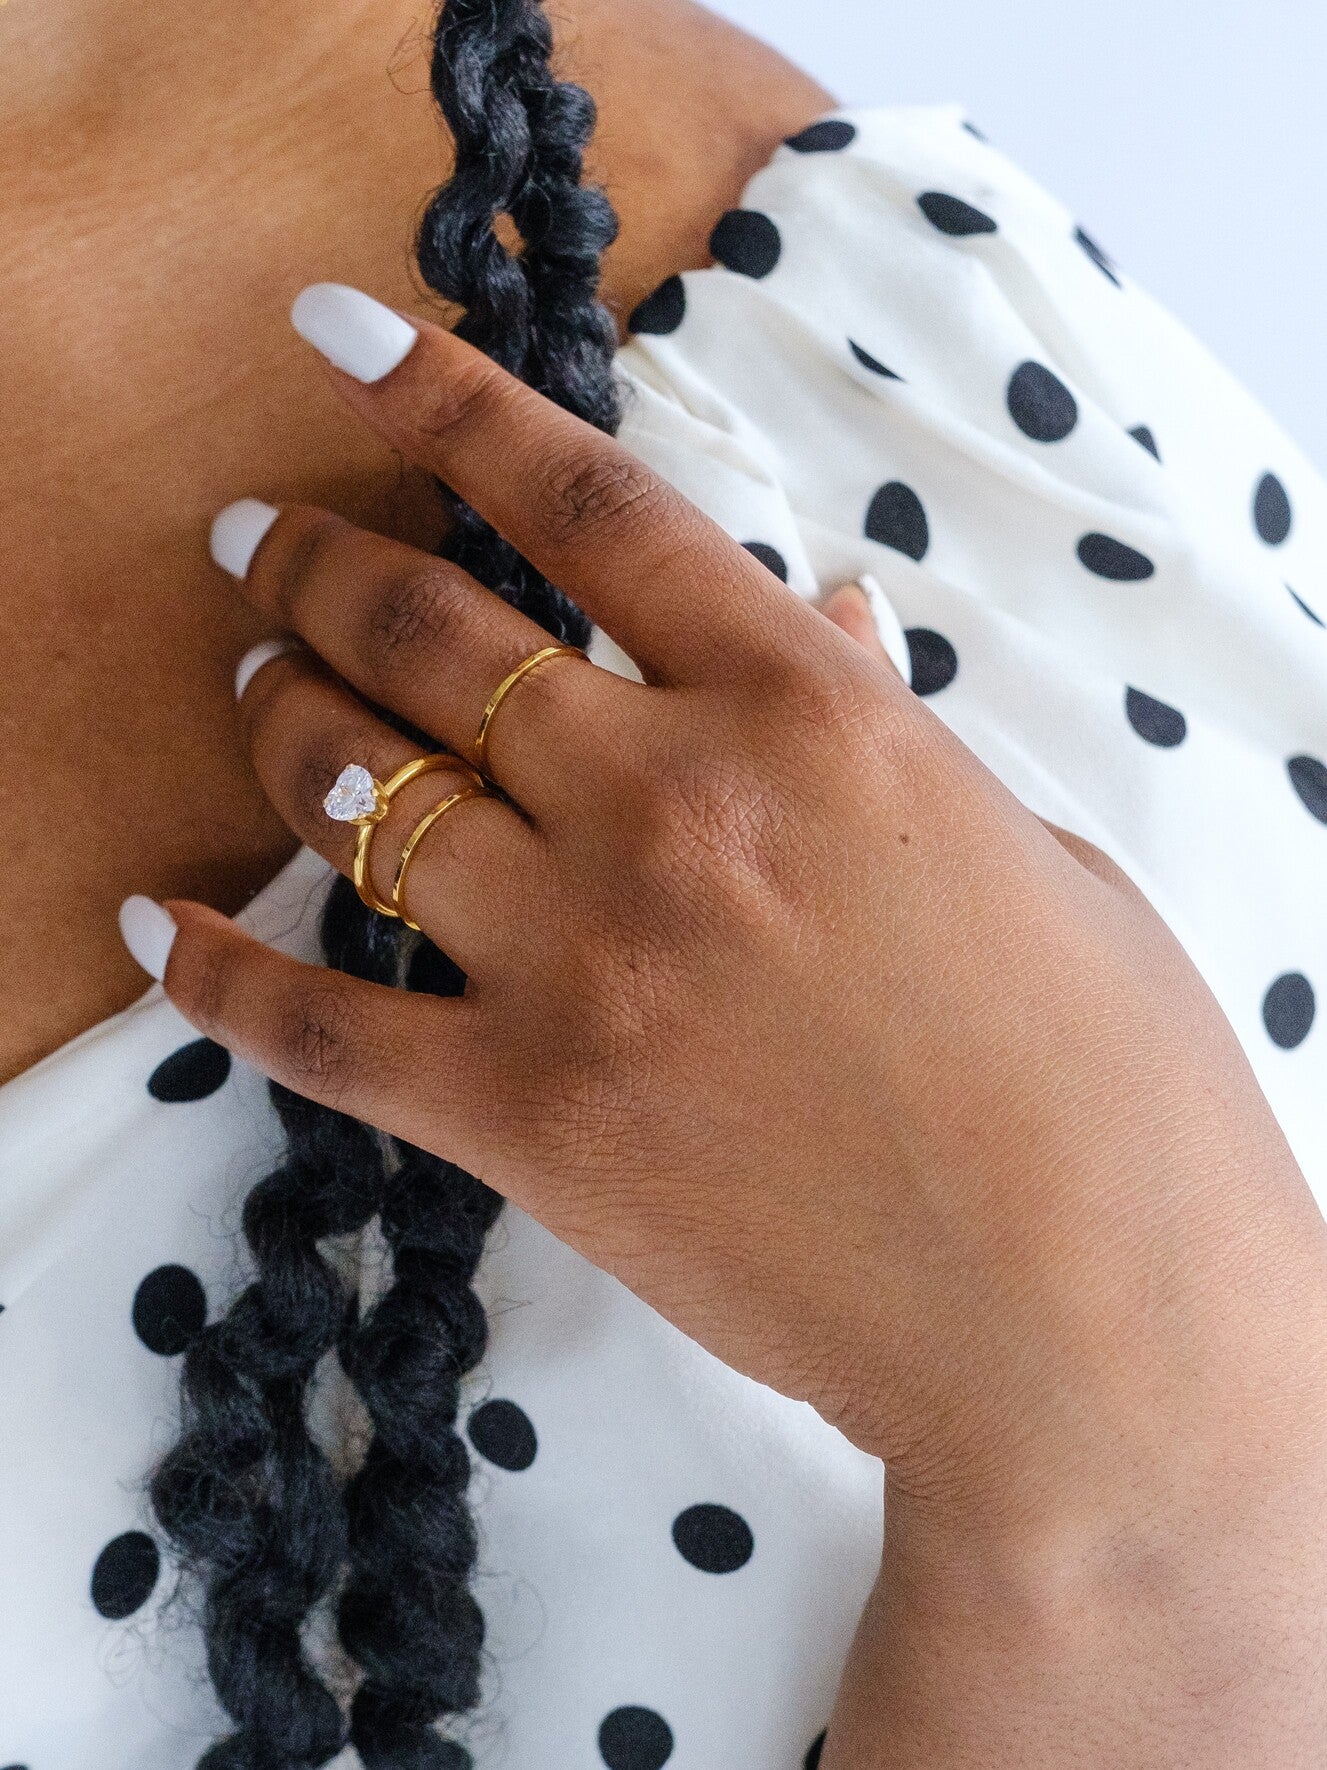 Woman's hand wearing 3 gold rings. Two rings are slim gold stacking bands. One ring is set with a clear heart gem stacked with  one of the gold bans